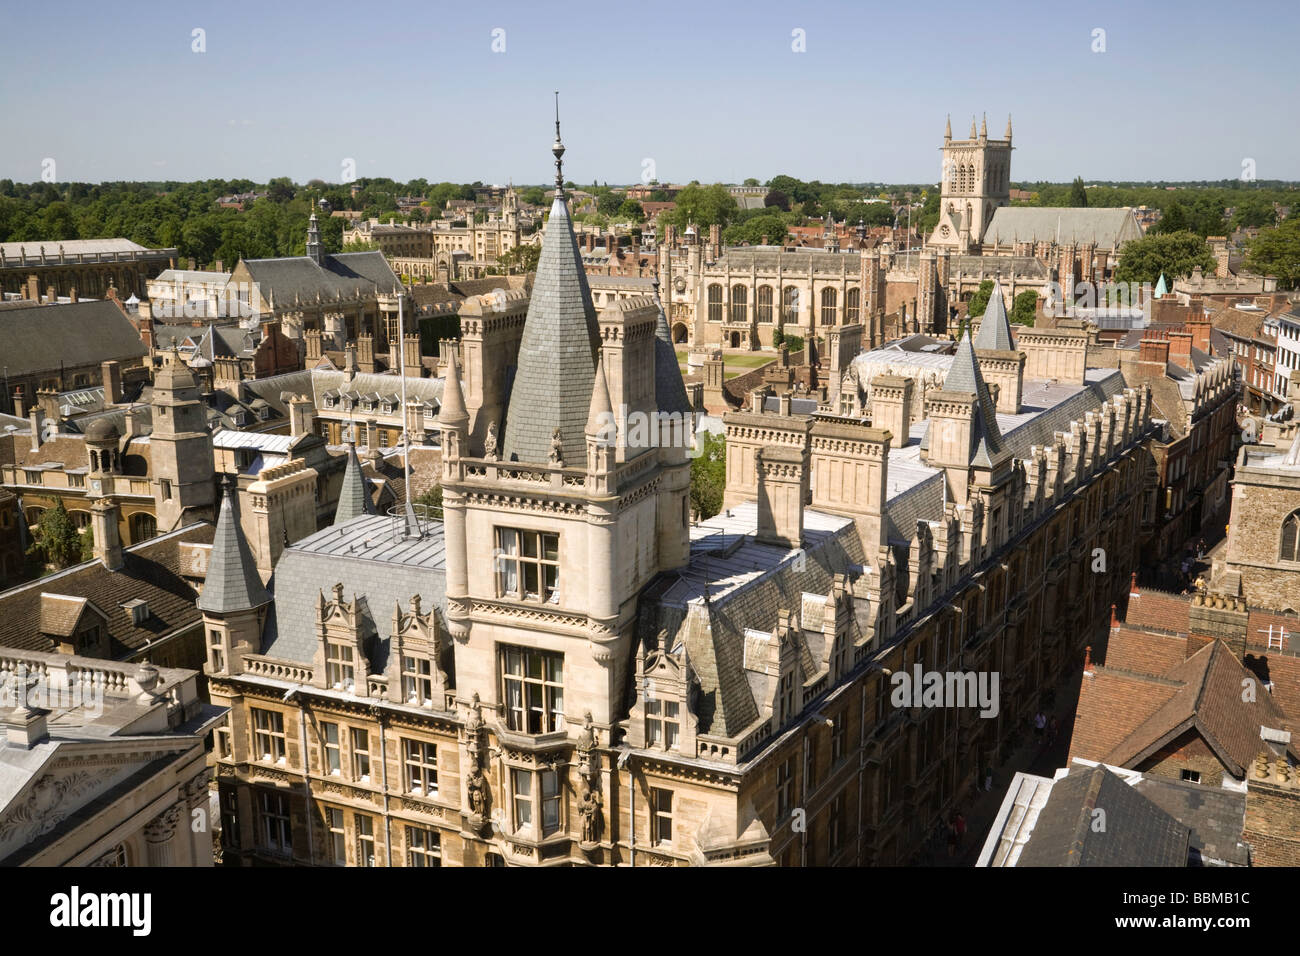 Cambridge skyline - view over Gonville and Caius and Trinity colleges towards St Johns College Chapel, Cambridge University colleges, Cambridge UK Stock Photo